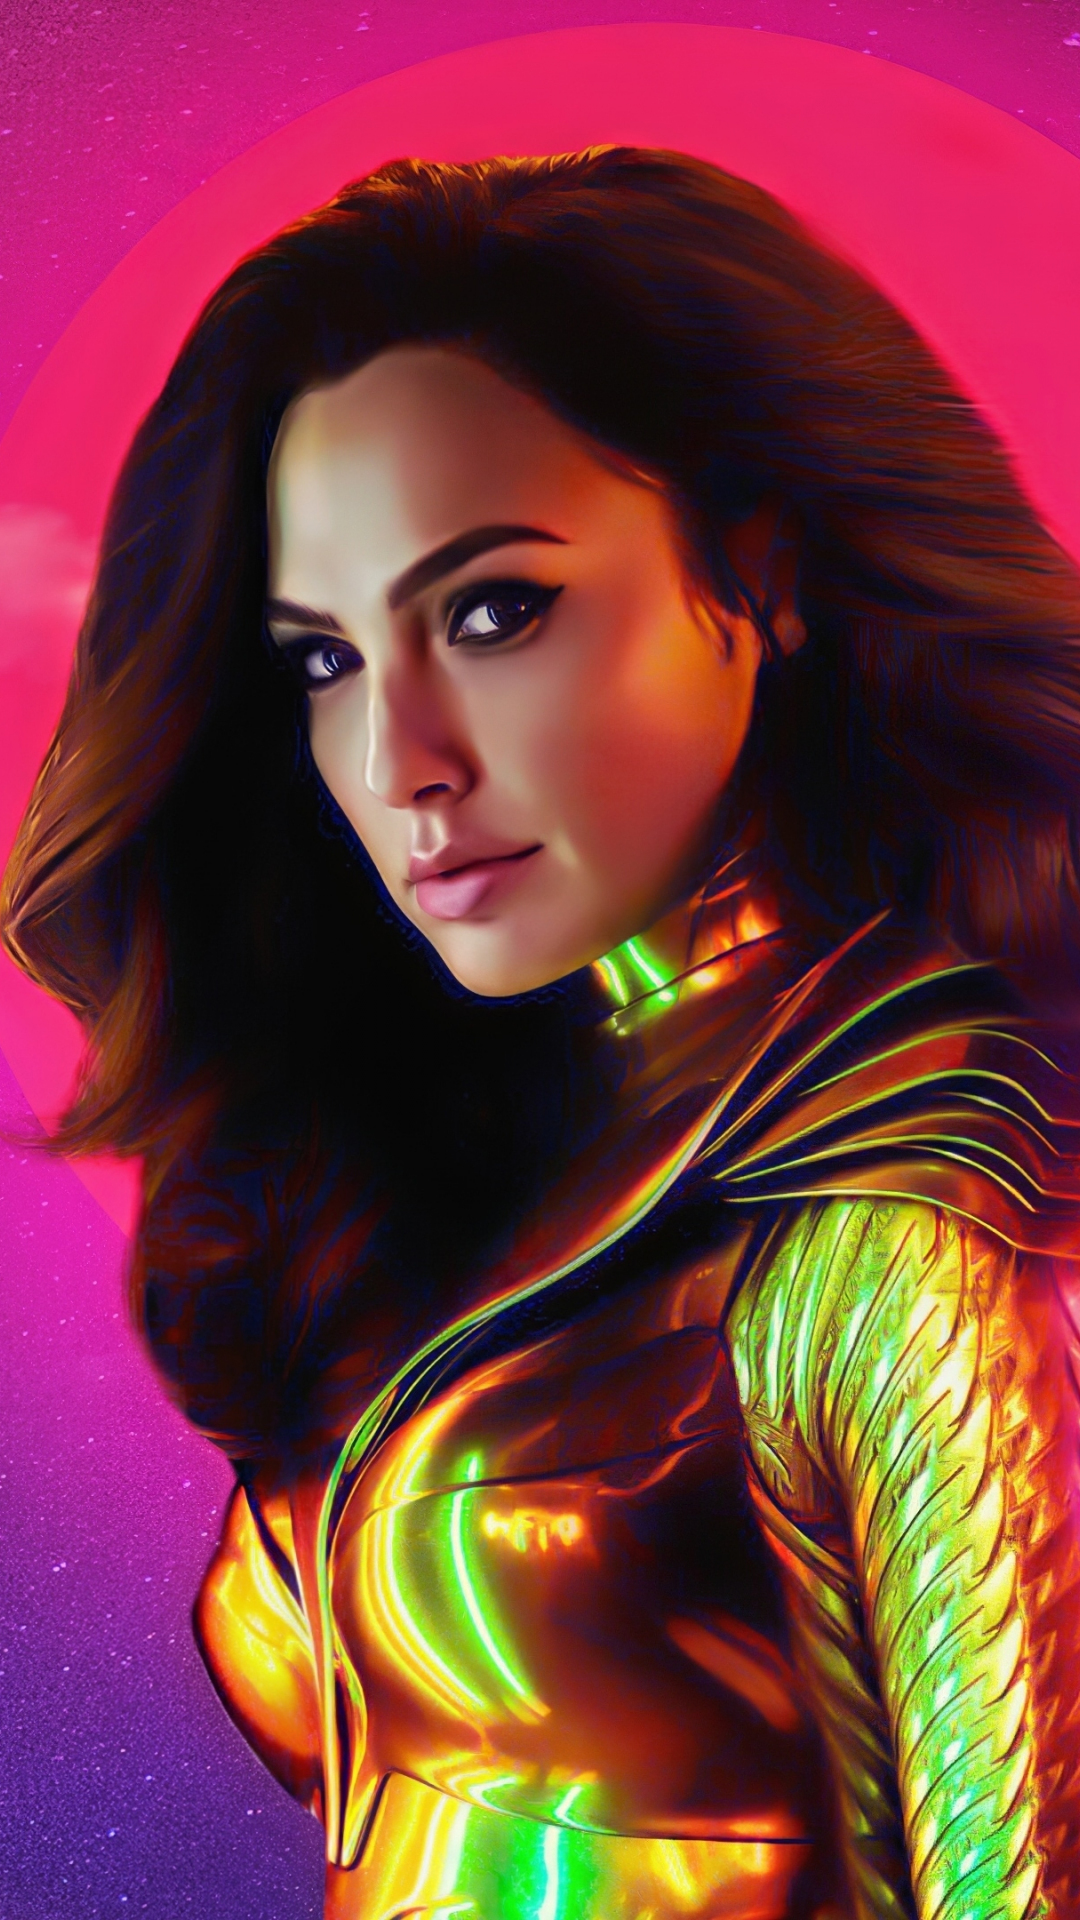 Nonton Wonder Woman 1984 : Cool 80s Inspired Wonder Woman 1984 Fanmade Movie Posters ... : Wonder woman comes into conflict with the soviet union during the cold war in the 1980s and finds a formidable foe by the name of the cheetah.